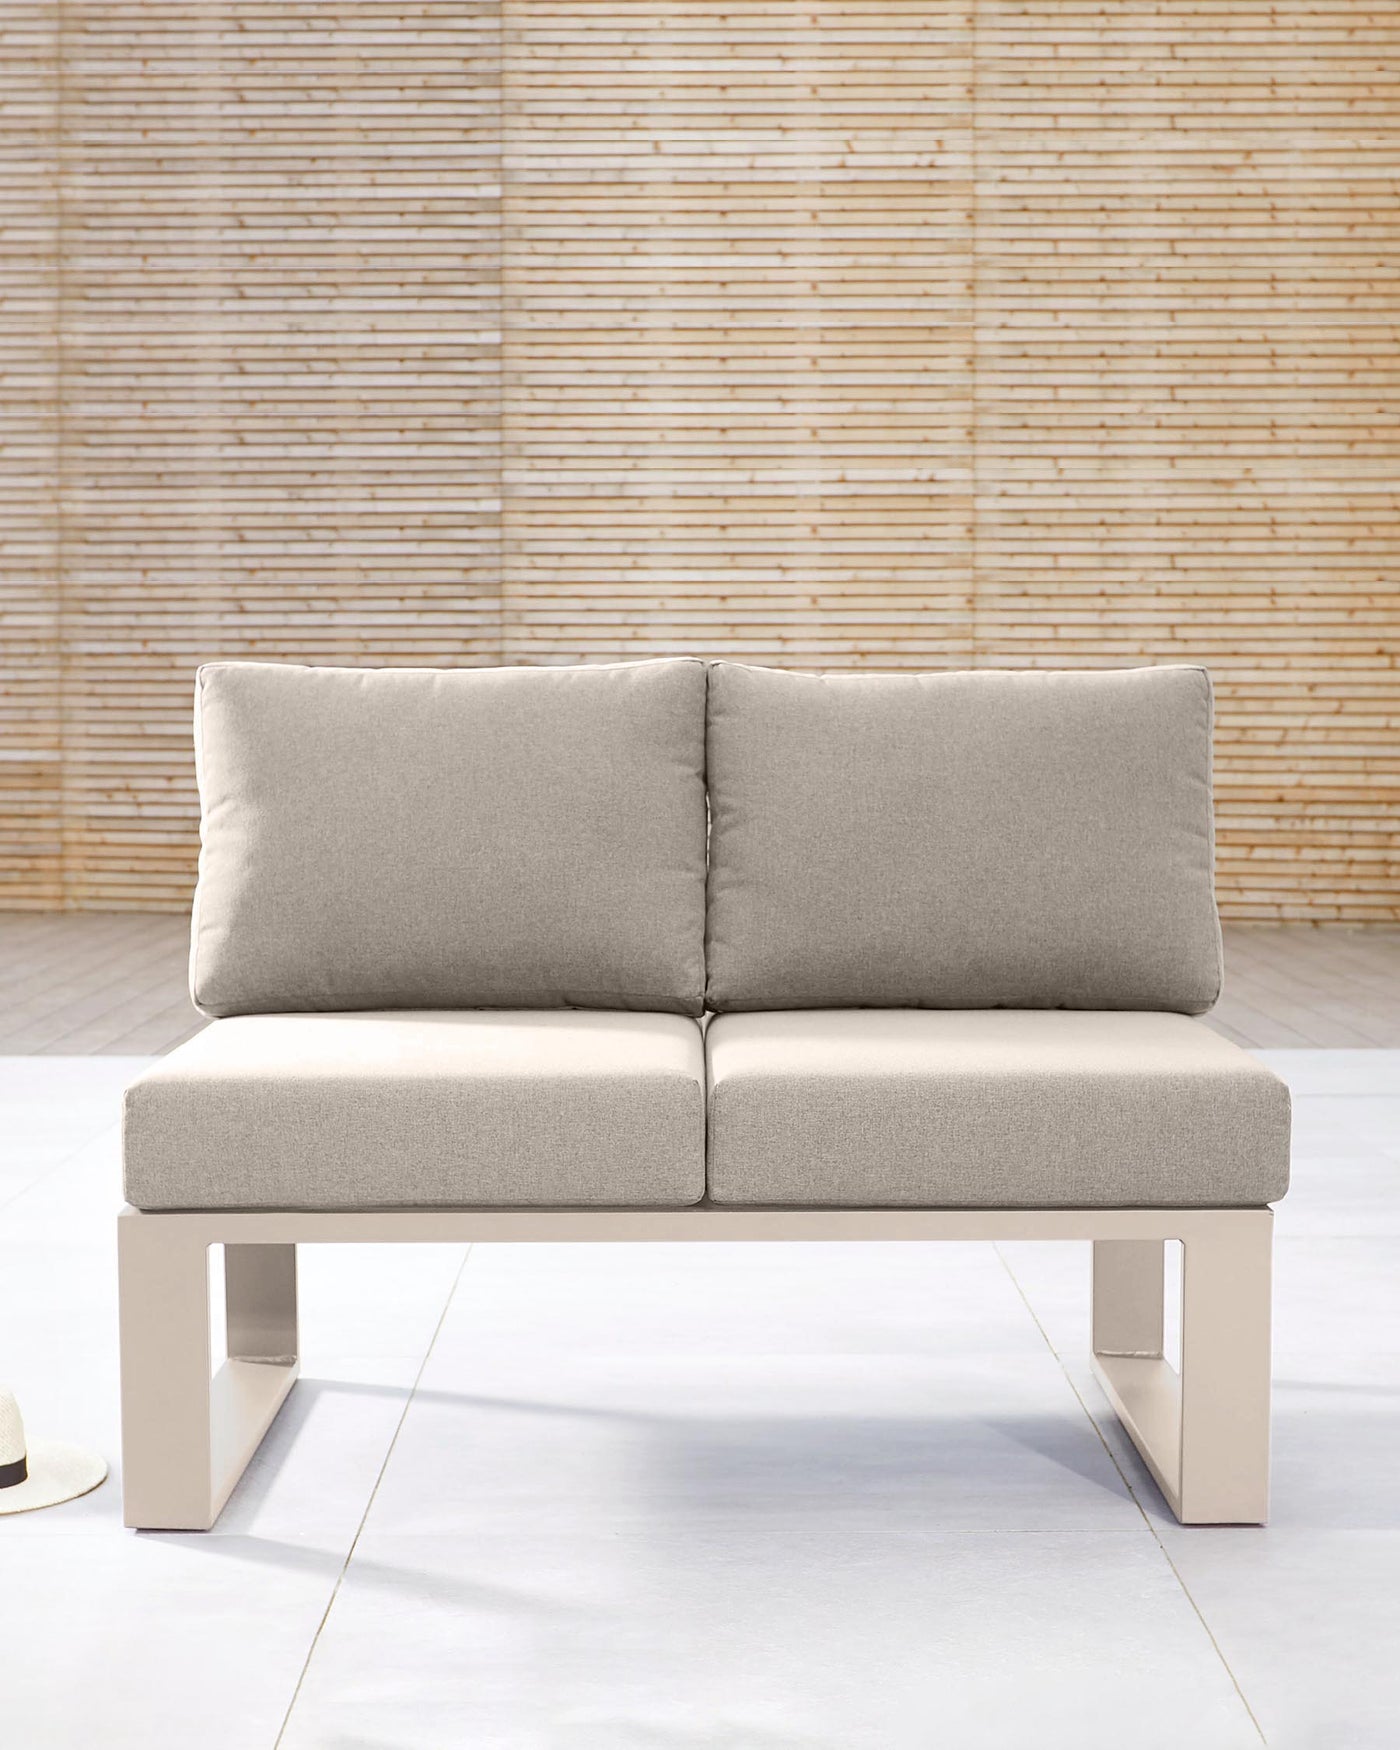 Modern two-seater sofa with light grey fabric upholstery and sleek rectangular metallic legs. The couch features a minimalist design with two plush back cushions and a continuous seat cushion, set against a warm, bamboo-textured wall, highlighting sharp lines and contemporary aesthetics.